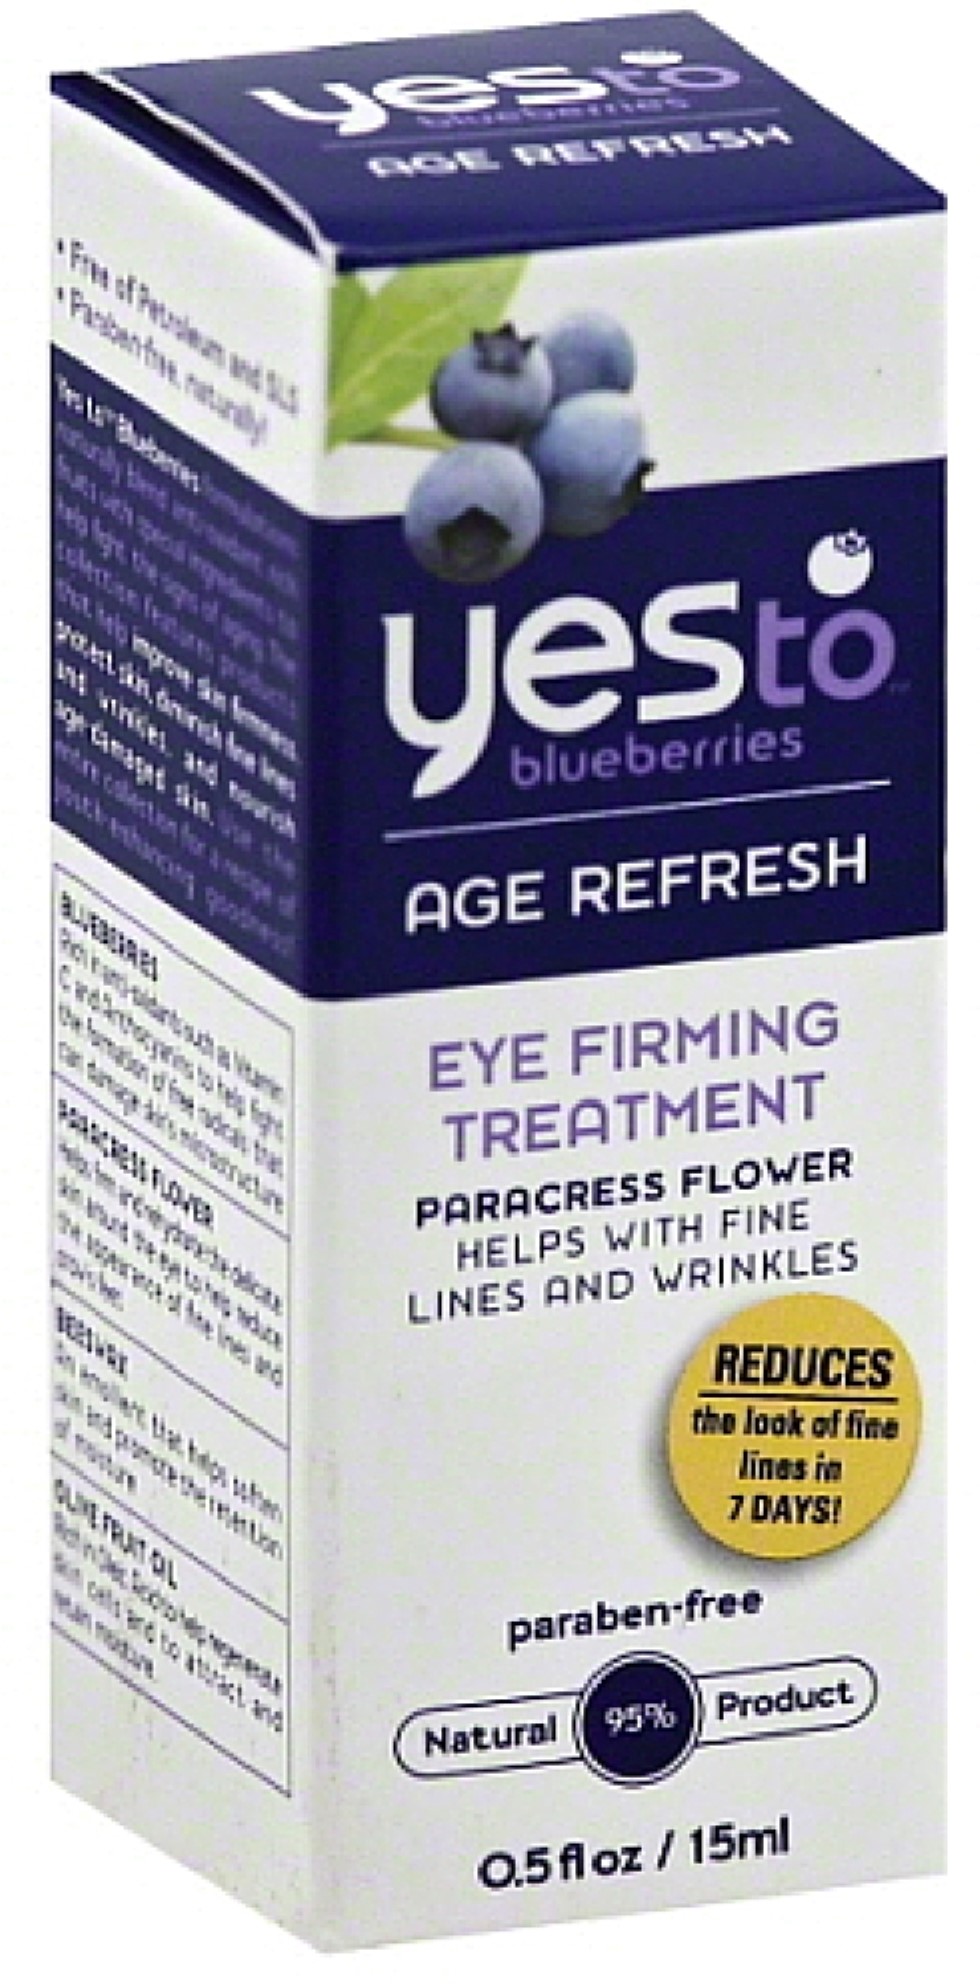 Yes To Blueberries Age Refresh Eye Firming Treatment 0.5 Fluid Ounce - image 1 of 5